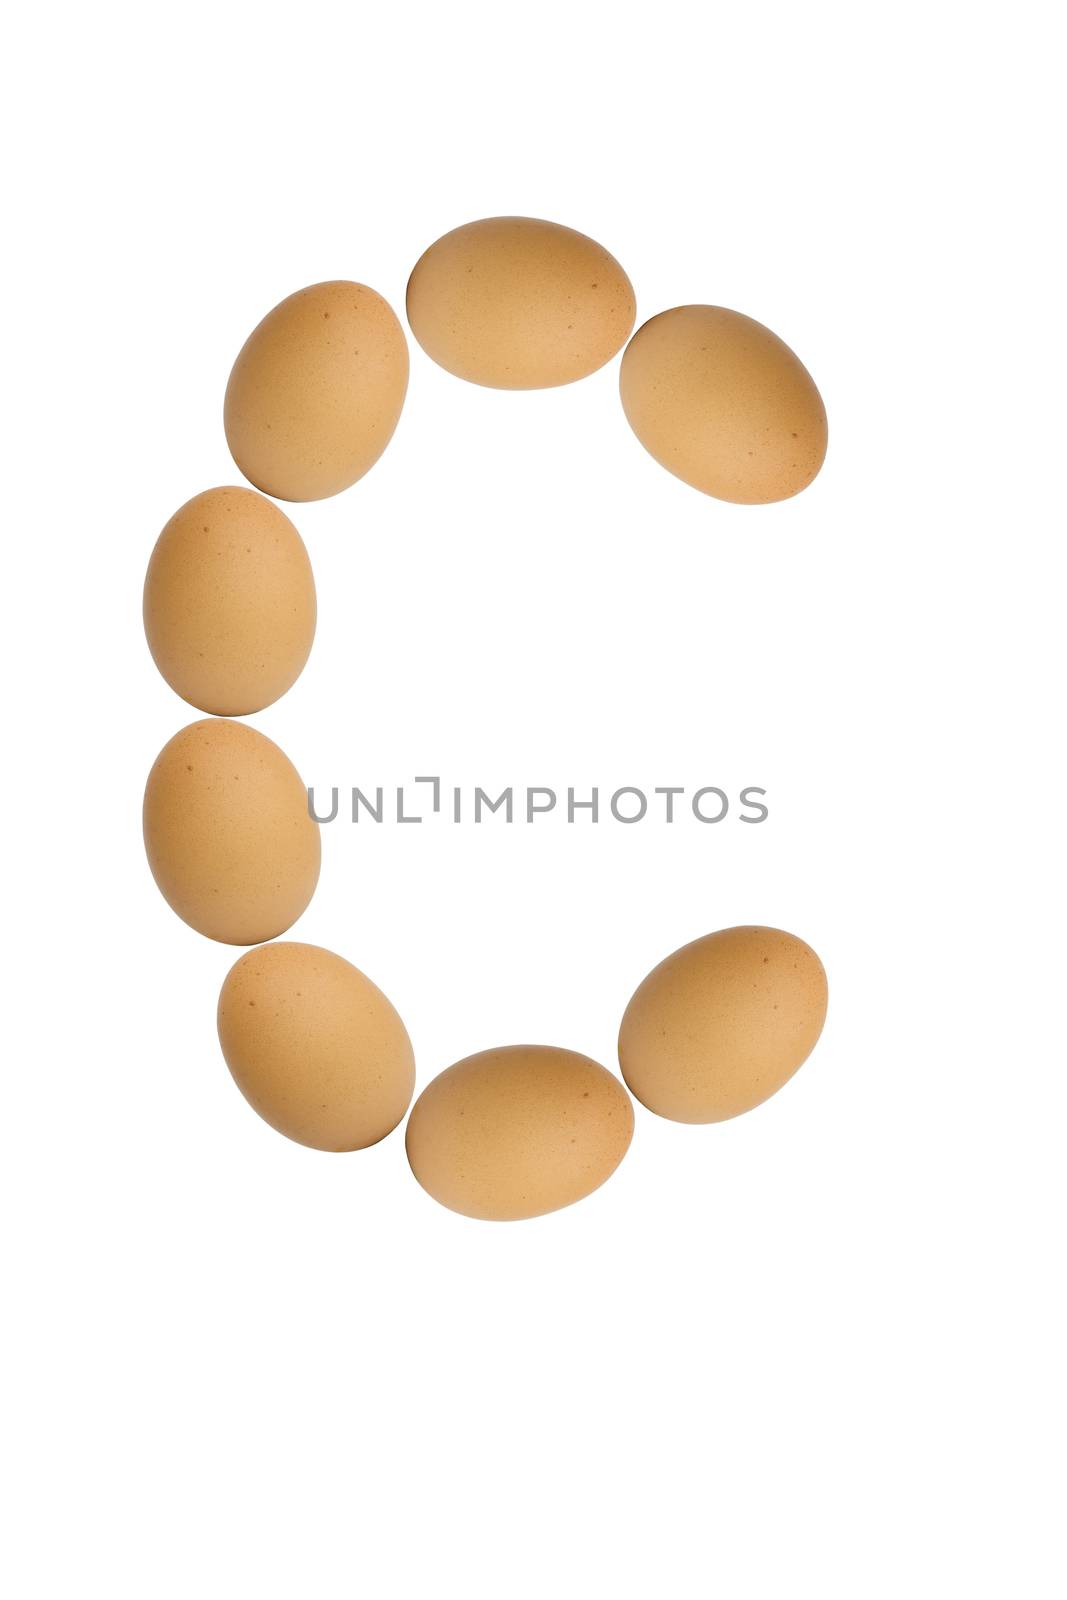 Alphabets  A to Z from brown eggs alphabet isolated on white background, C